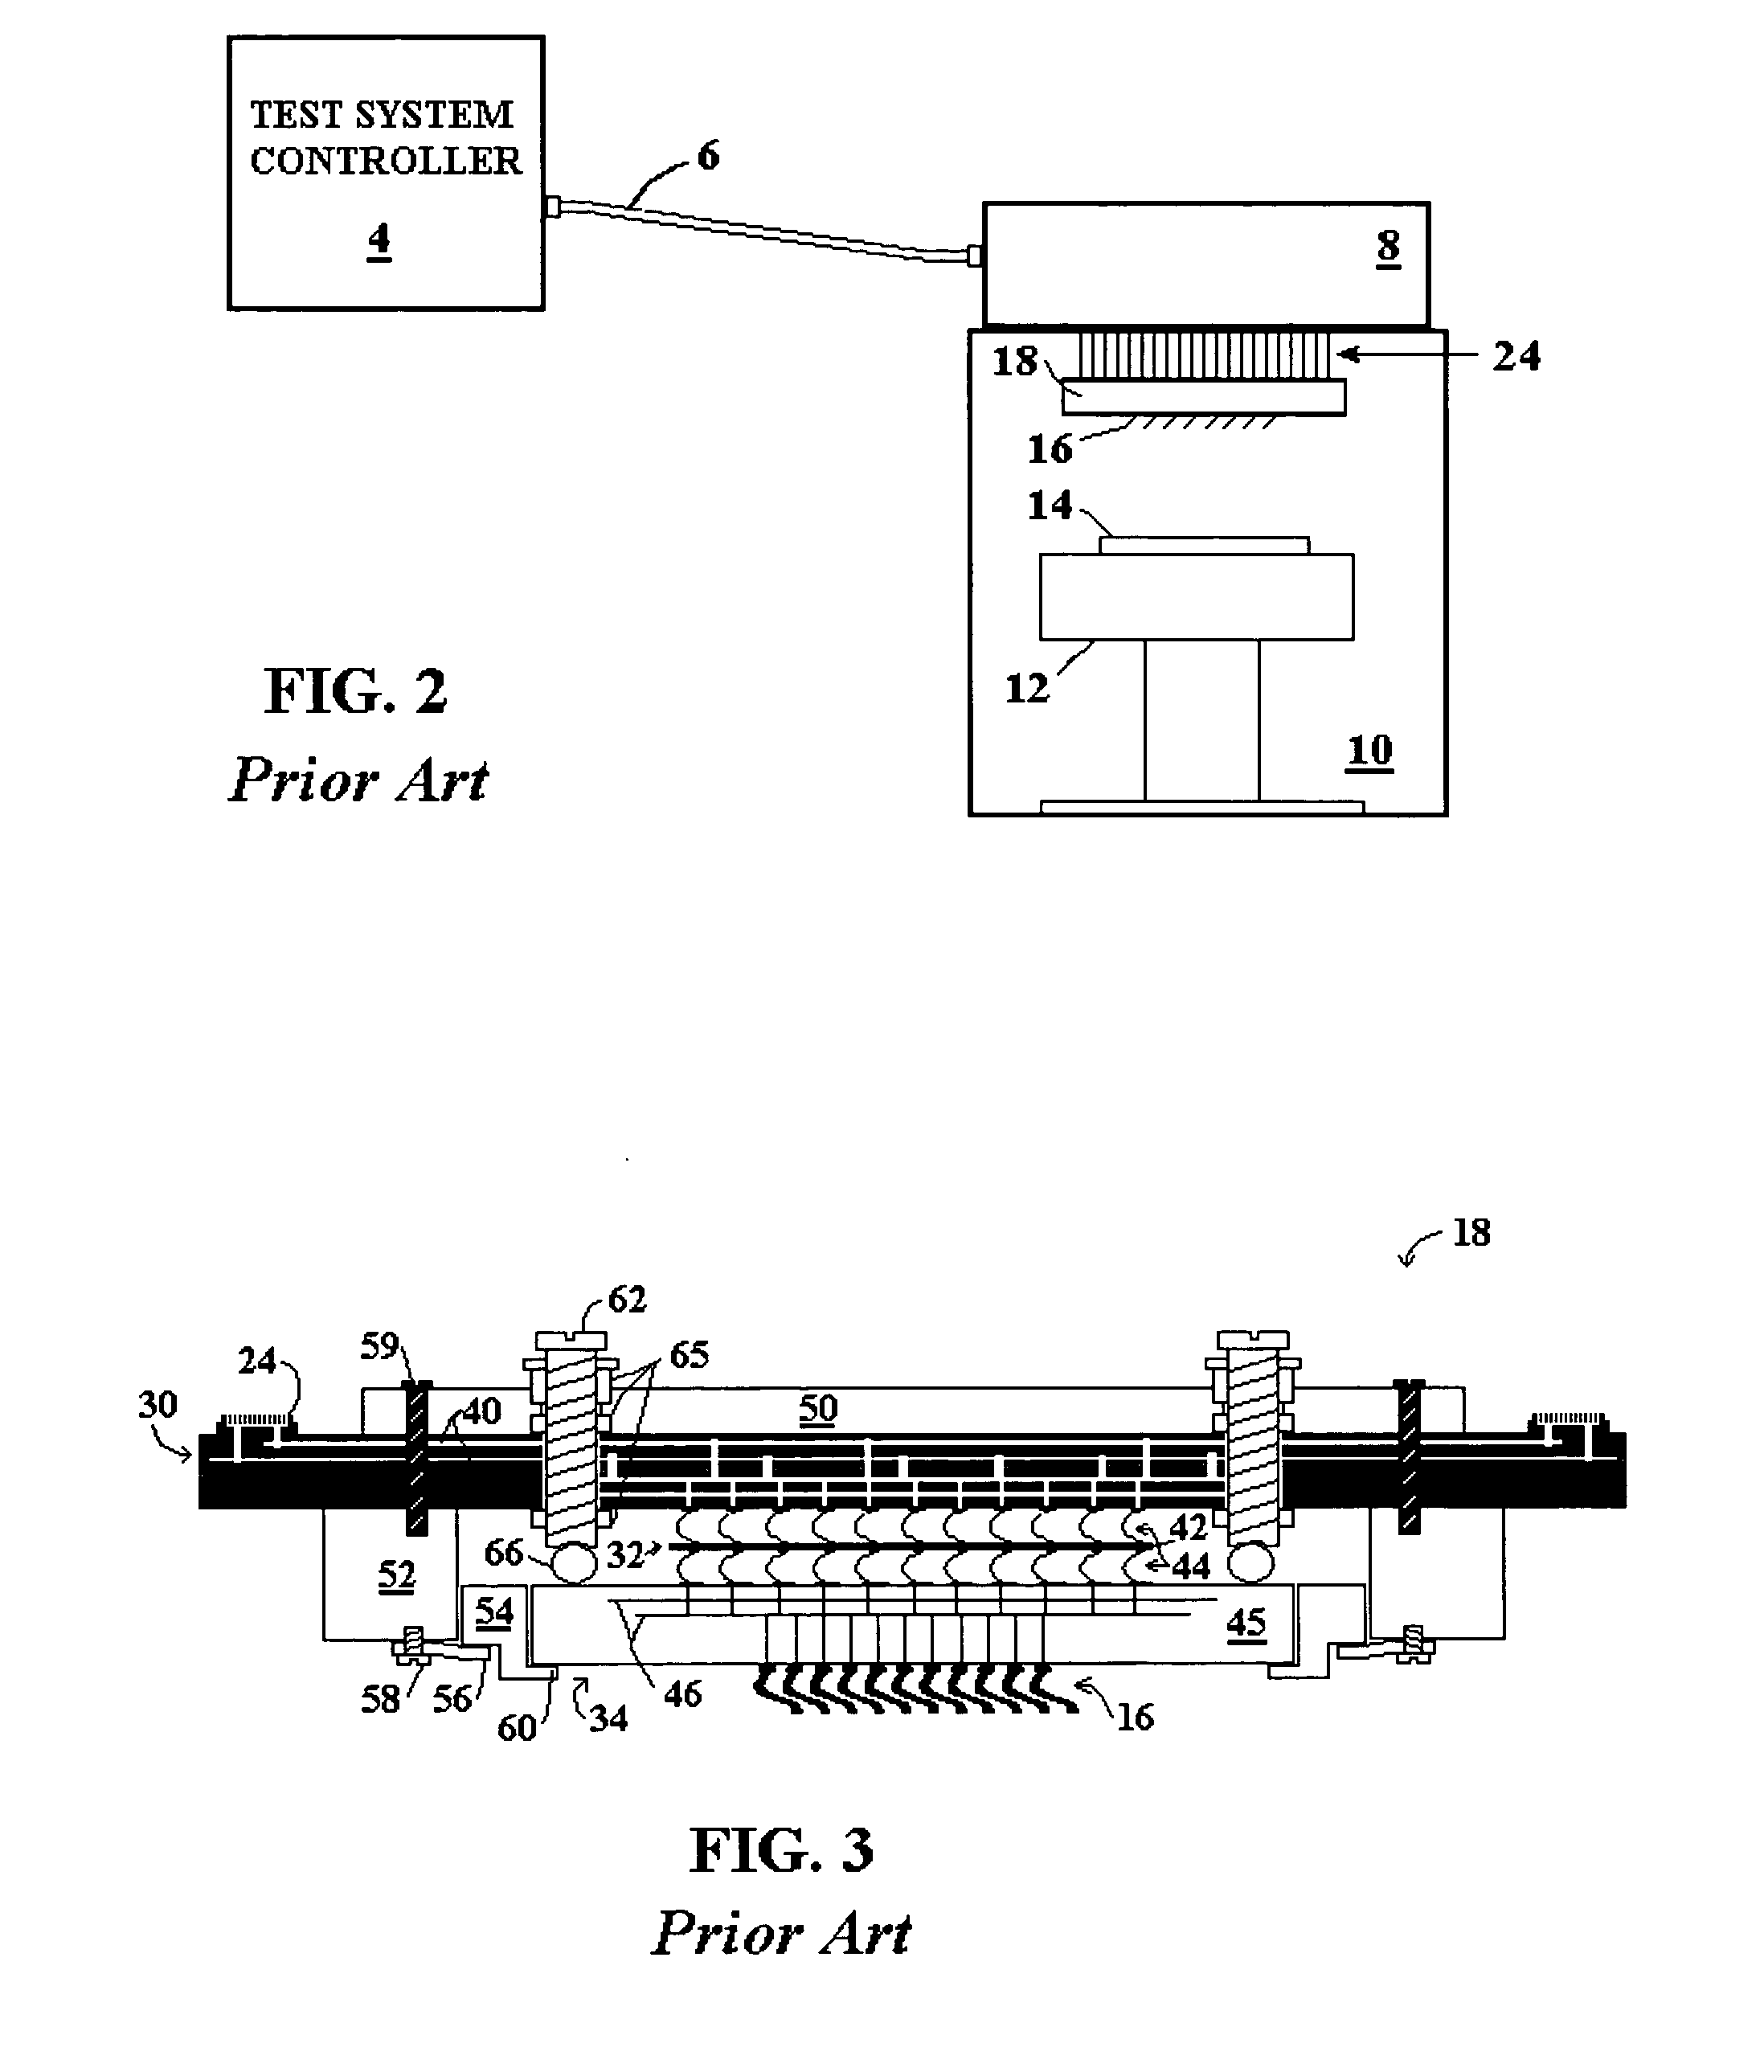 Method of designing an application specific probe card test system